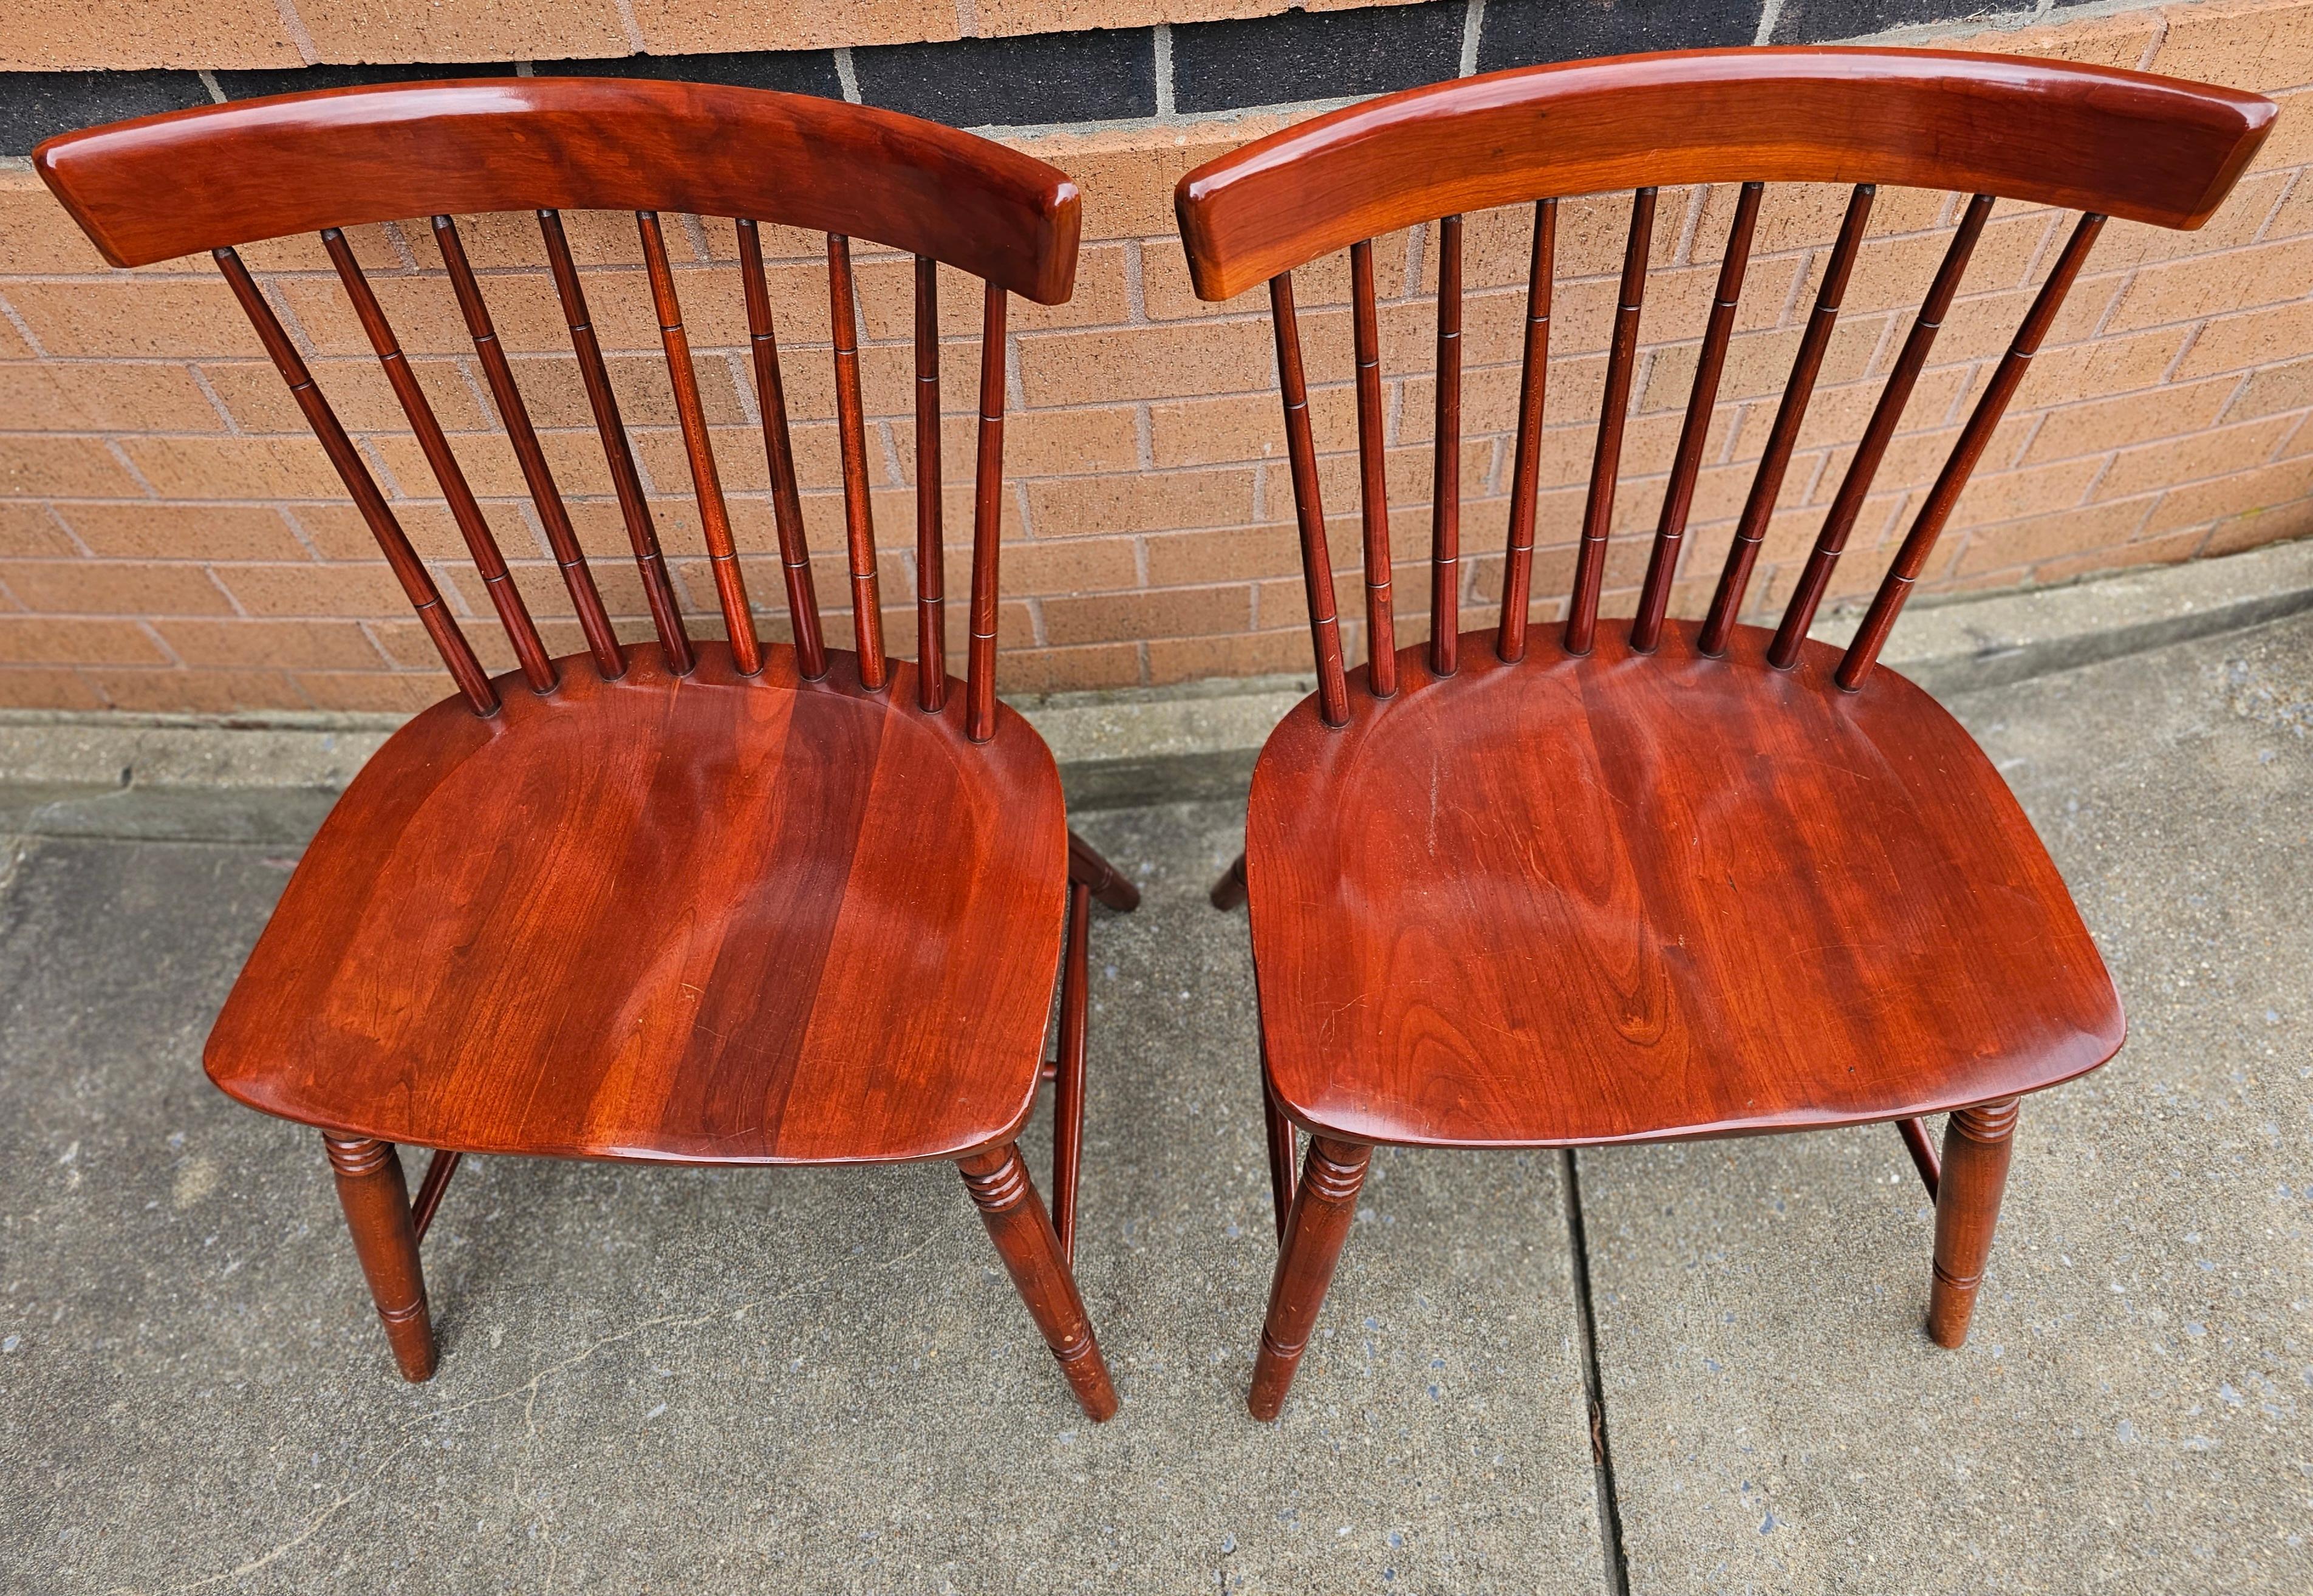 Late 20th Century Solid Cherry Spindle back Windsor Style Chairs with saddle back seat and with great finishes . Measures 23